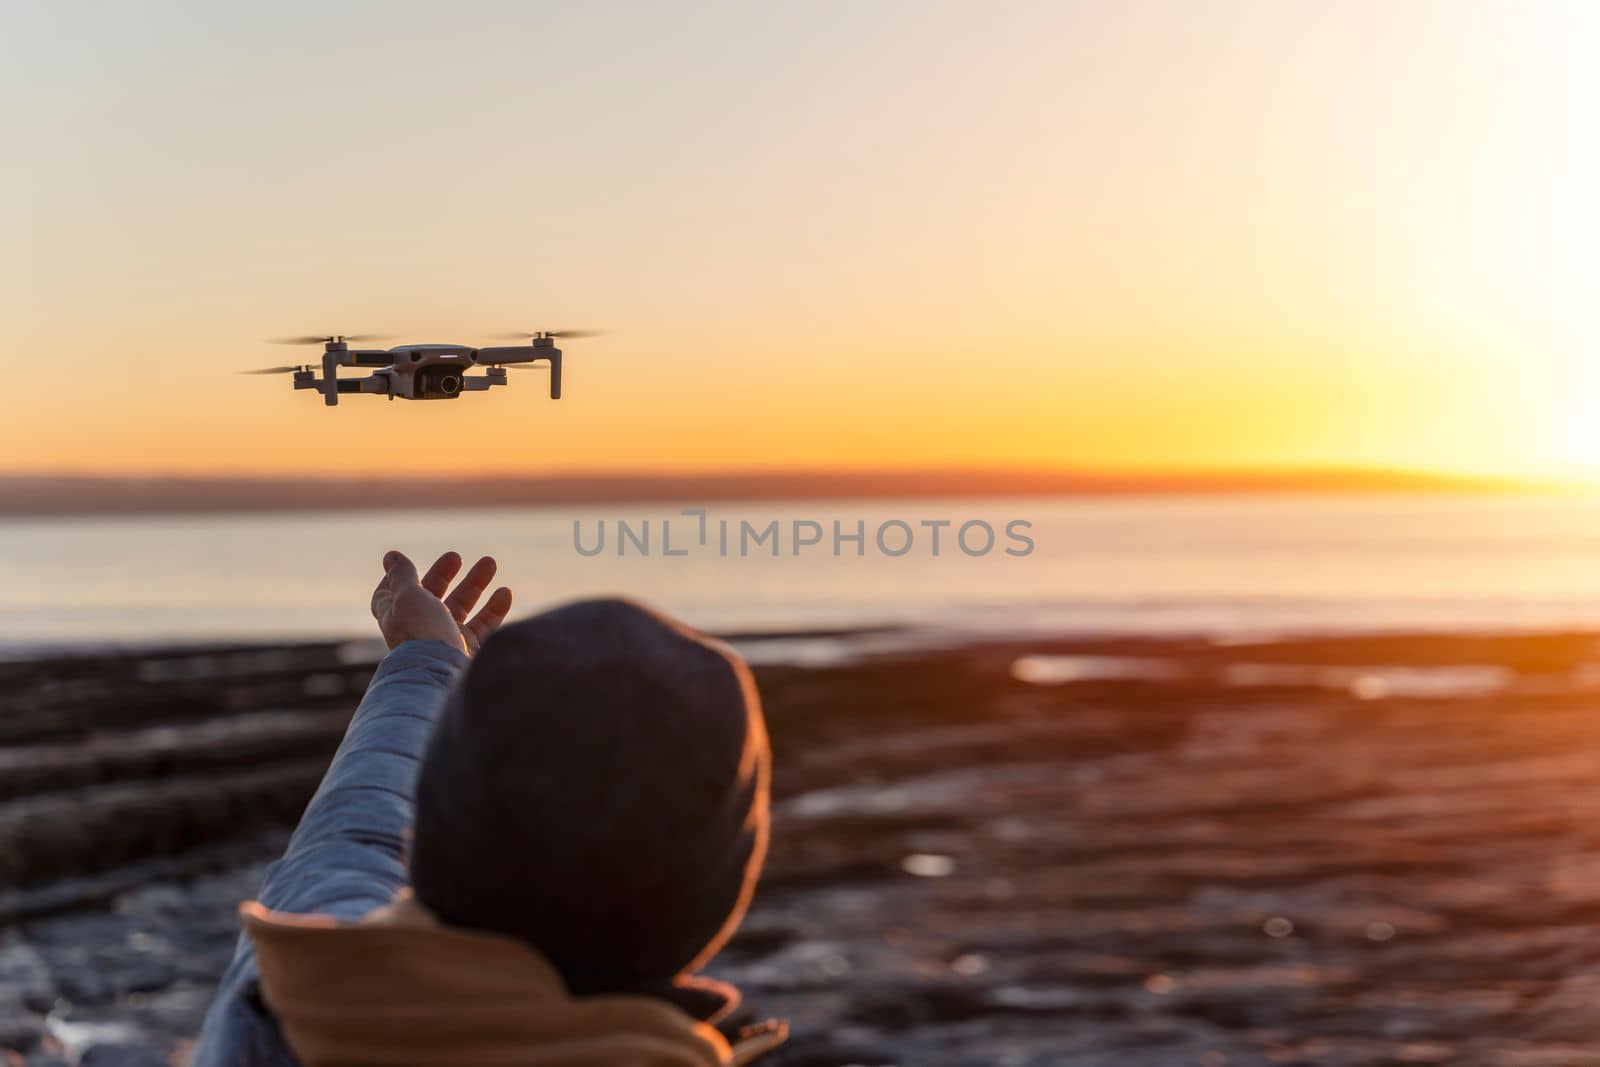 Bearded man using a drone with remote controller making photos and videos, having fun with new technology trends